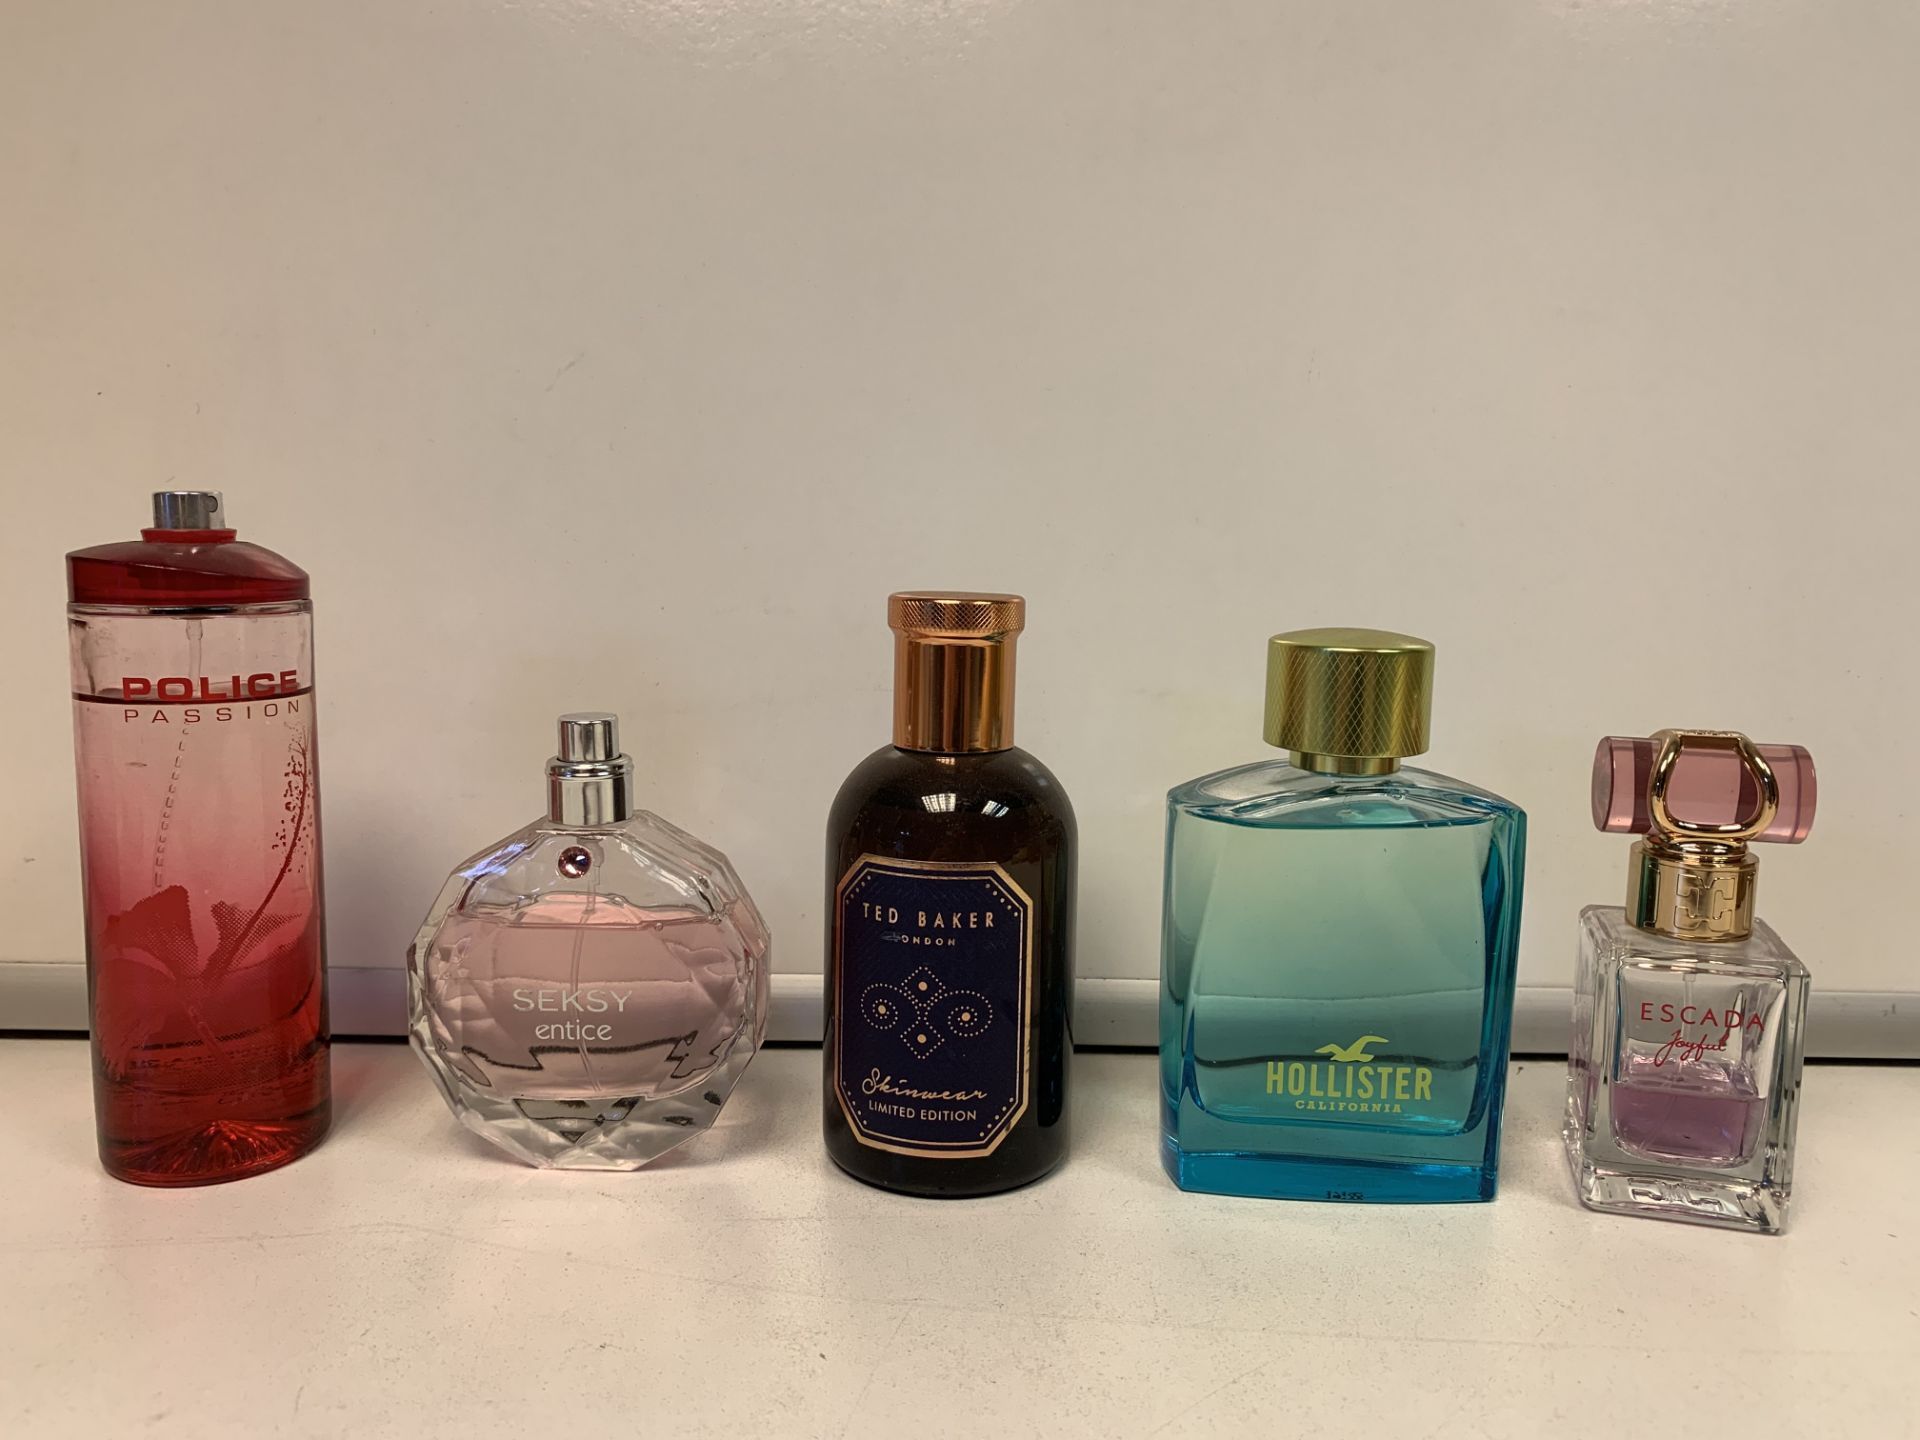 5 X PERFUMES/AFTERSHAVES 90-100% FULL INCLUDING TED BAKER, HOLLISTER, POLICE ETC (330/15)